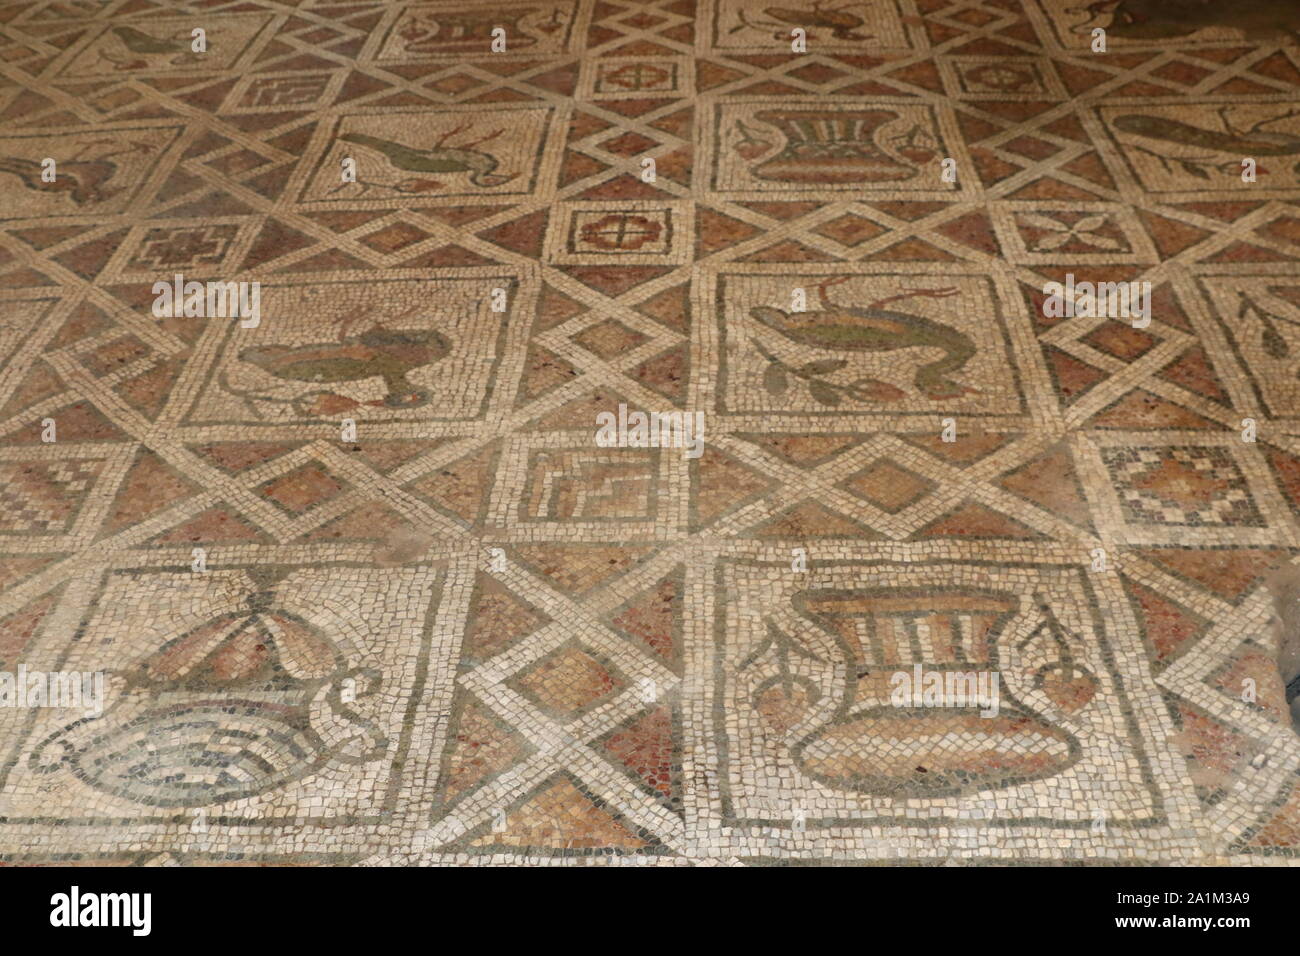 Roman mosaic floor located in archaeological site in The Bishop's Basilica of Philippopolis, the city of Plovdiv, Bulgaria. Mosaic floor. Roman mosaic Stock Photo